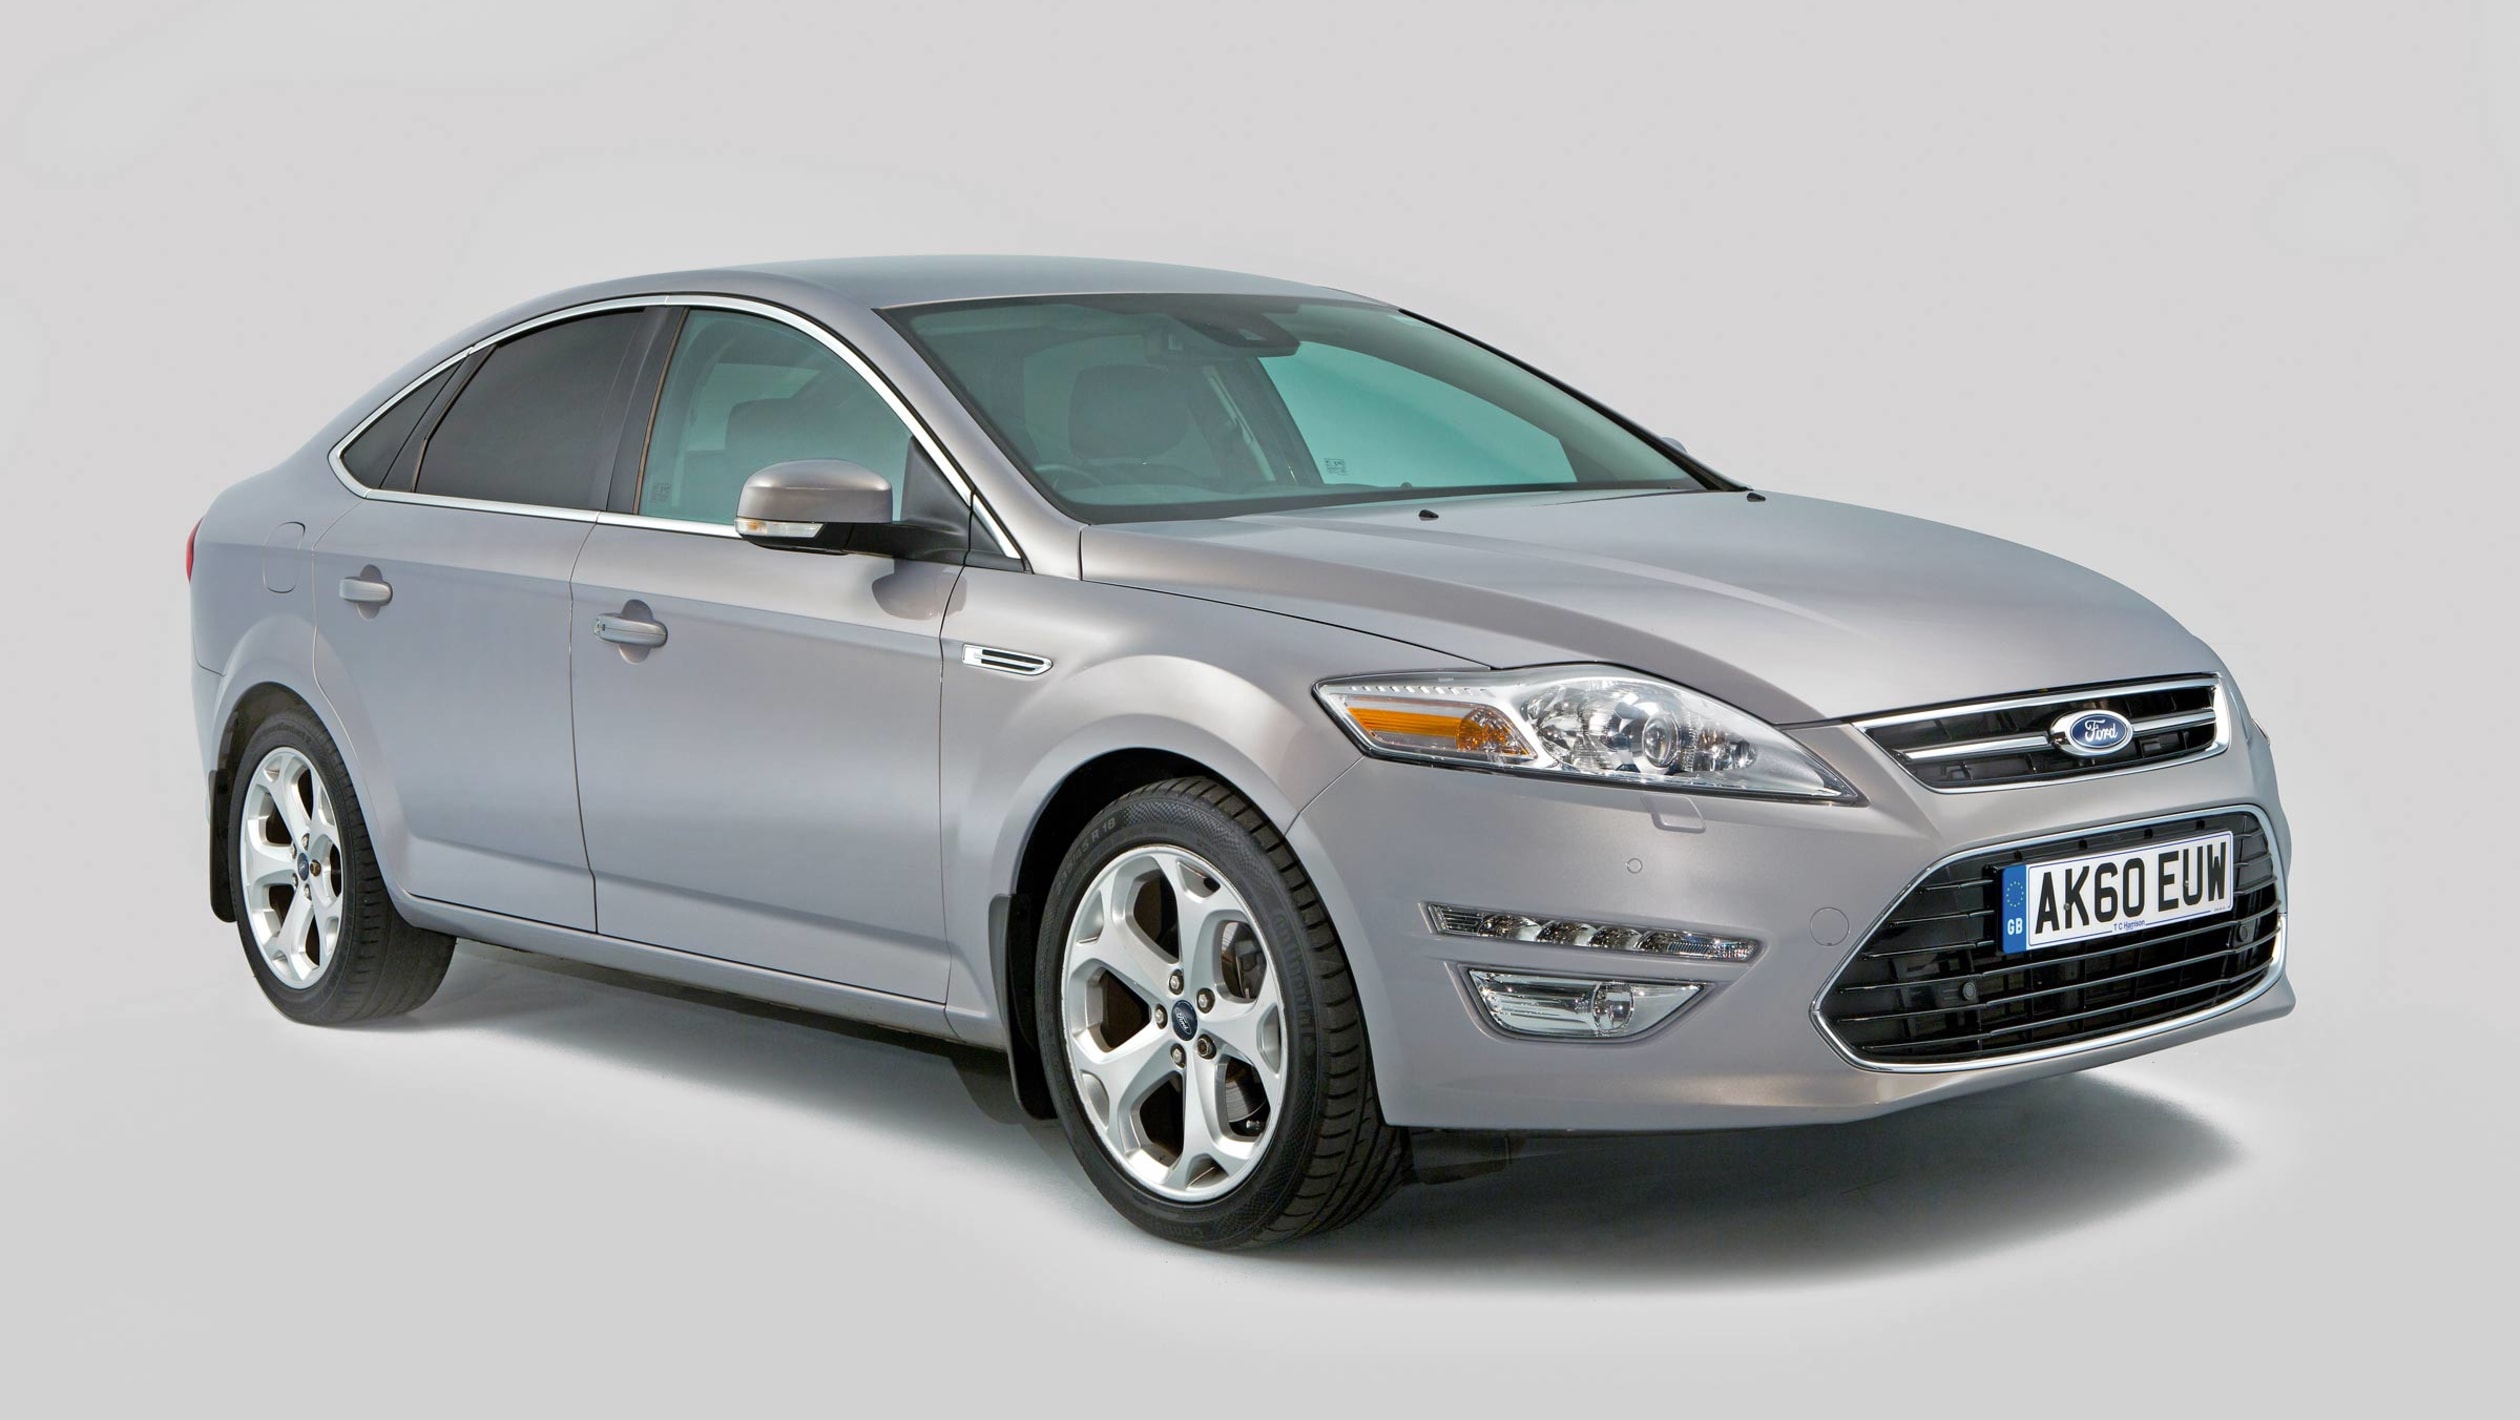 Used Ford Mondeo (Mk4) buying guide images Carbuyer